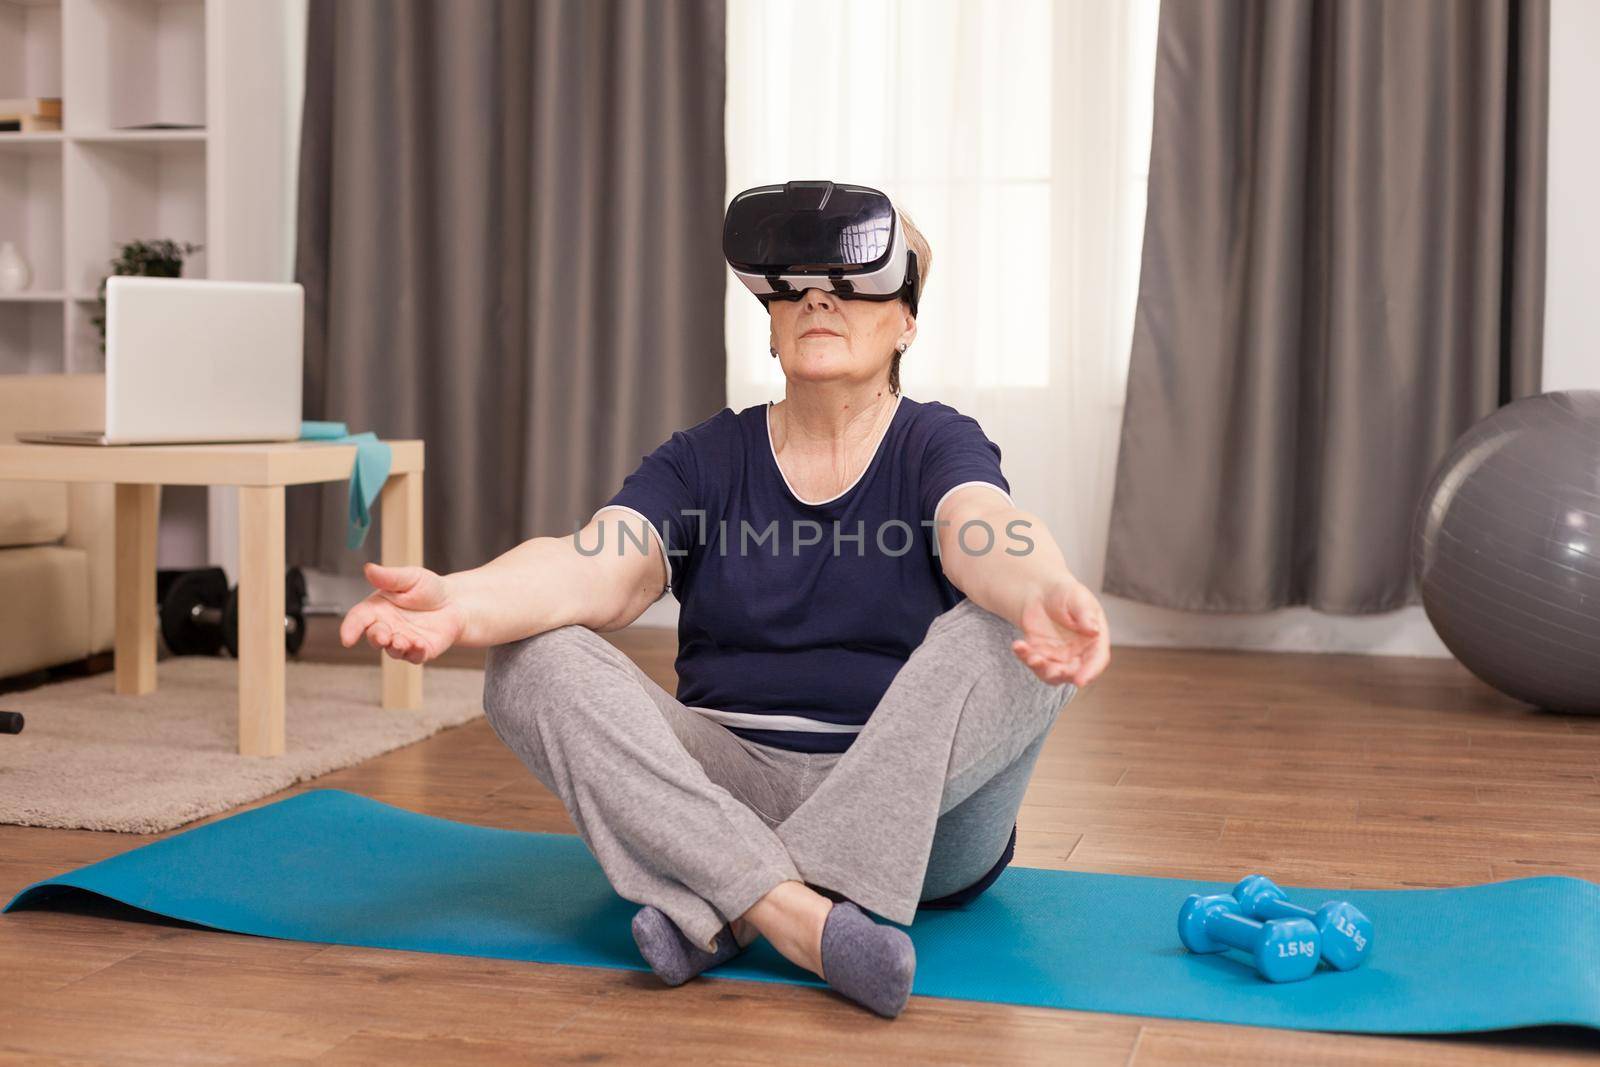 Grandmother wearing VR headset sitting on yoga mat. Old person pensioner online internet exercise training at home sport activity with dumbbell, resistance band, swiss ball and VR headset at elderly retirement age